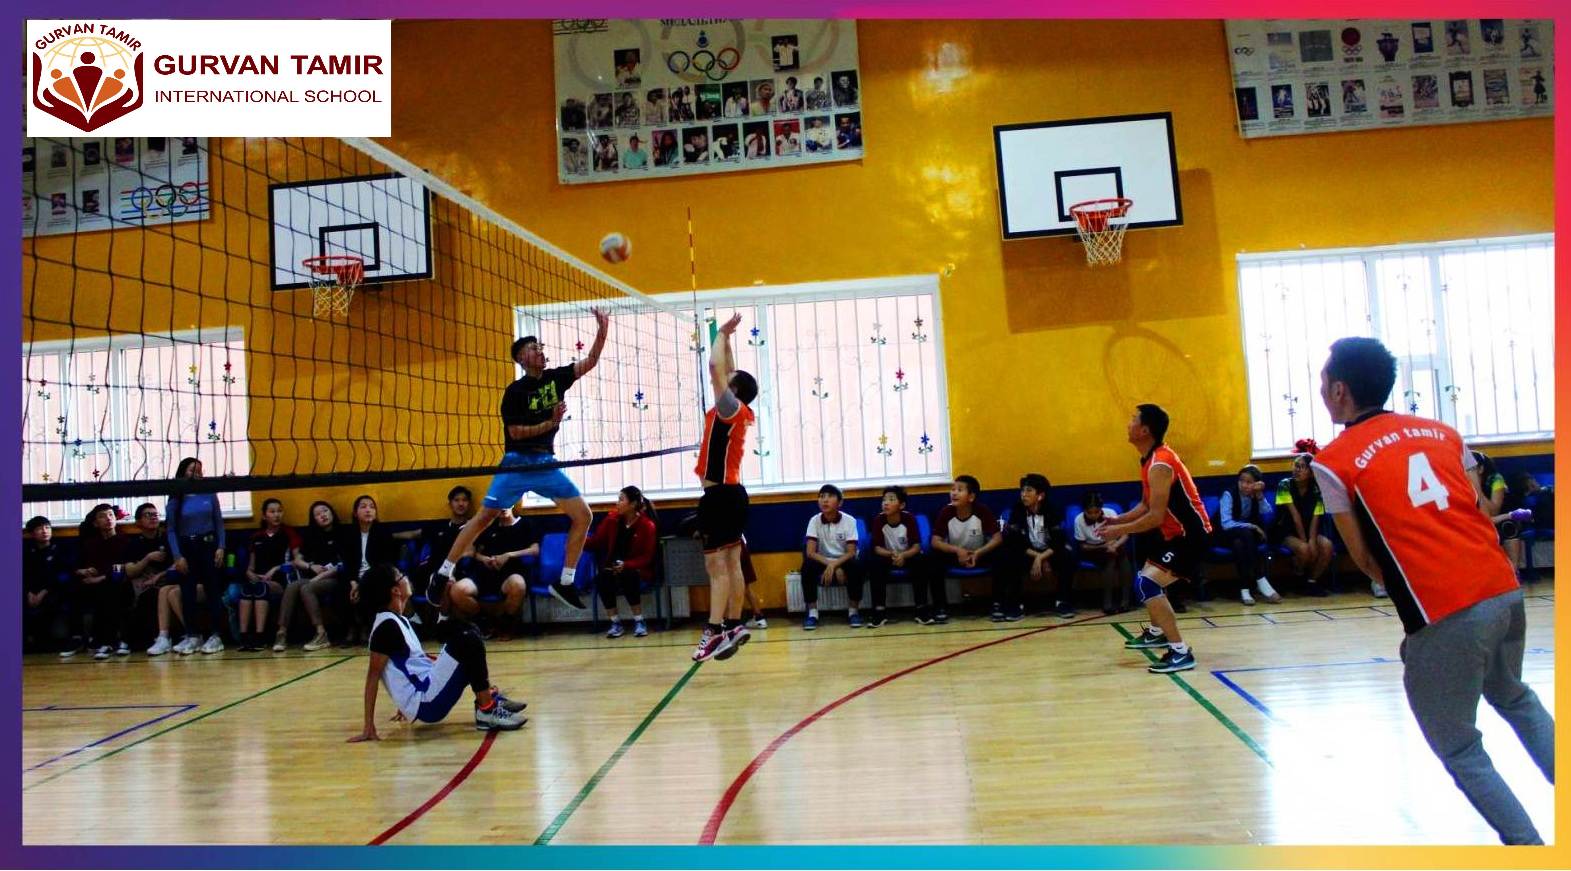 VOLLEYBALL TOURNAMENT AMONGST GRADES 8 TO 12  ORGANISED SUCCESSFULLY